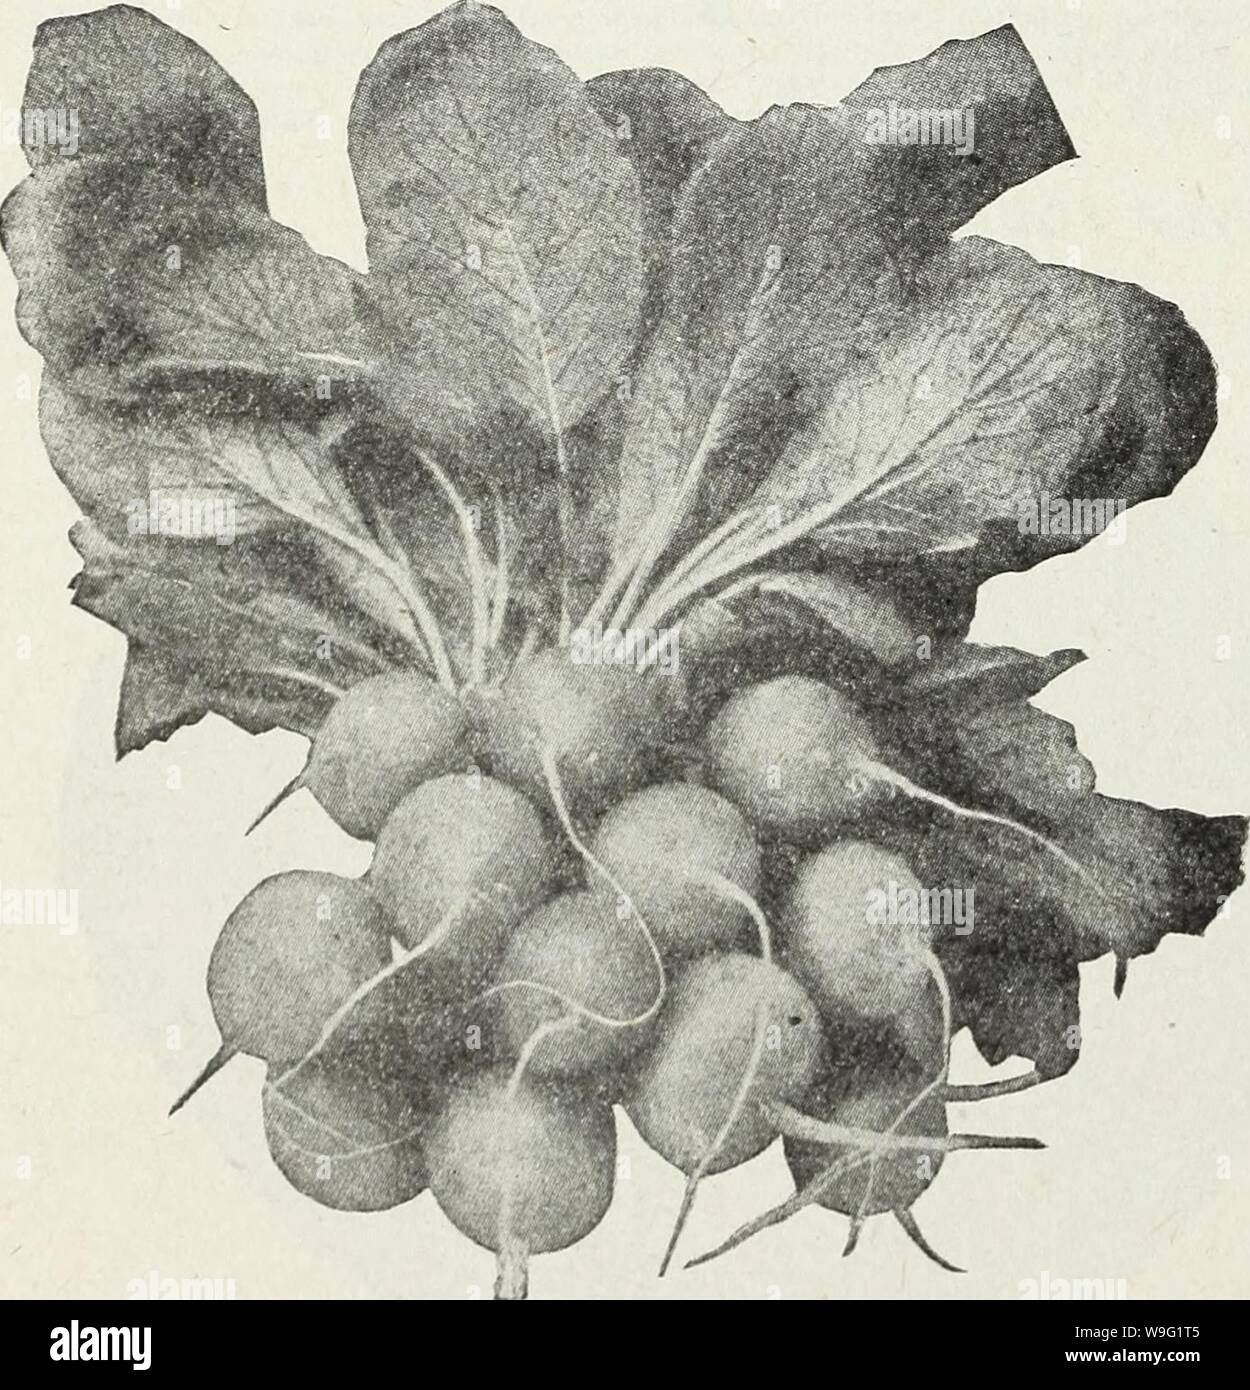 Archive image from page 93 of Currie's farm and garden annual. Currie's farm and garden annual : spring 1930  curriesfarmgarde19curr Year: 1930 ( RADISH Scarlet Globe Radish CRIMSON GIANT—Grows rapidly to a very large size and is very attractive in ap- pearance. The skin is bright crimson, flesh white and tender, with no tendency to become pithy or hollow. Pkt., 10c; oz., 15c; YA lb., 40c; 1 lb., $1.00. WHITE TIPPED SCARLET TURNIP (Rosy Gem)—A popular early variety. Pkt., 10c; oz., 15c; V lb., 35c; 1 lb., $1.00. Light rich ground is best for Radishes. Sow in shallow drills 12 inches apart ever Stock Photo